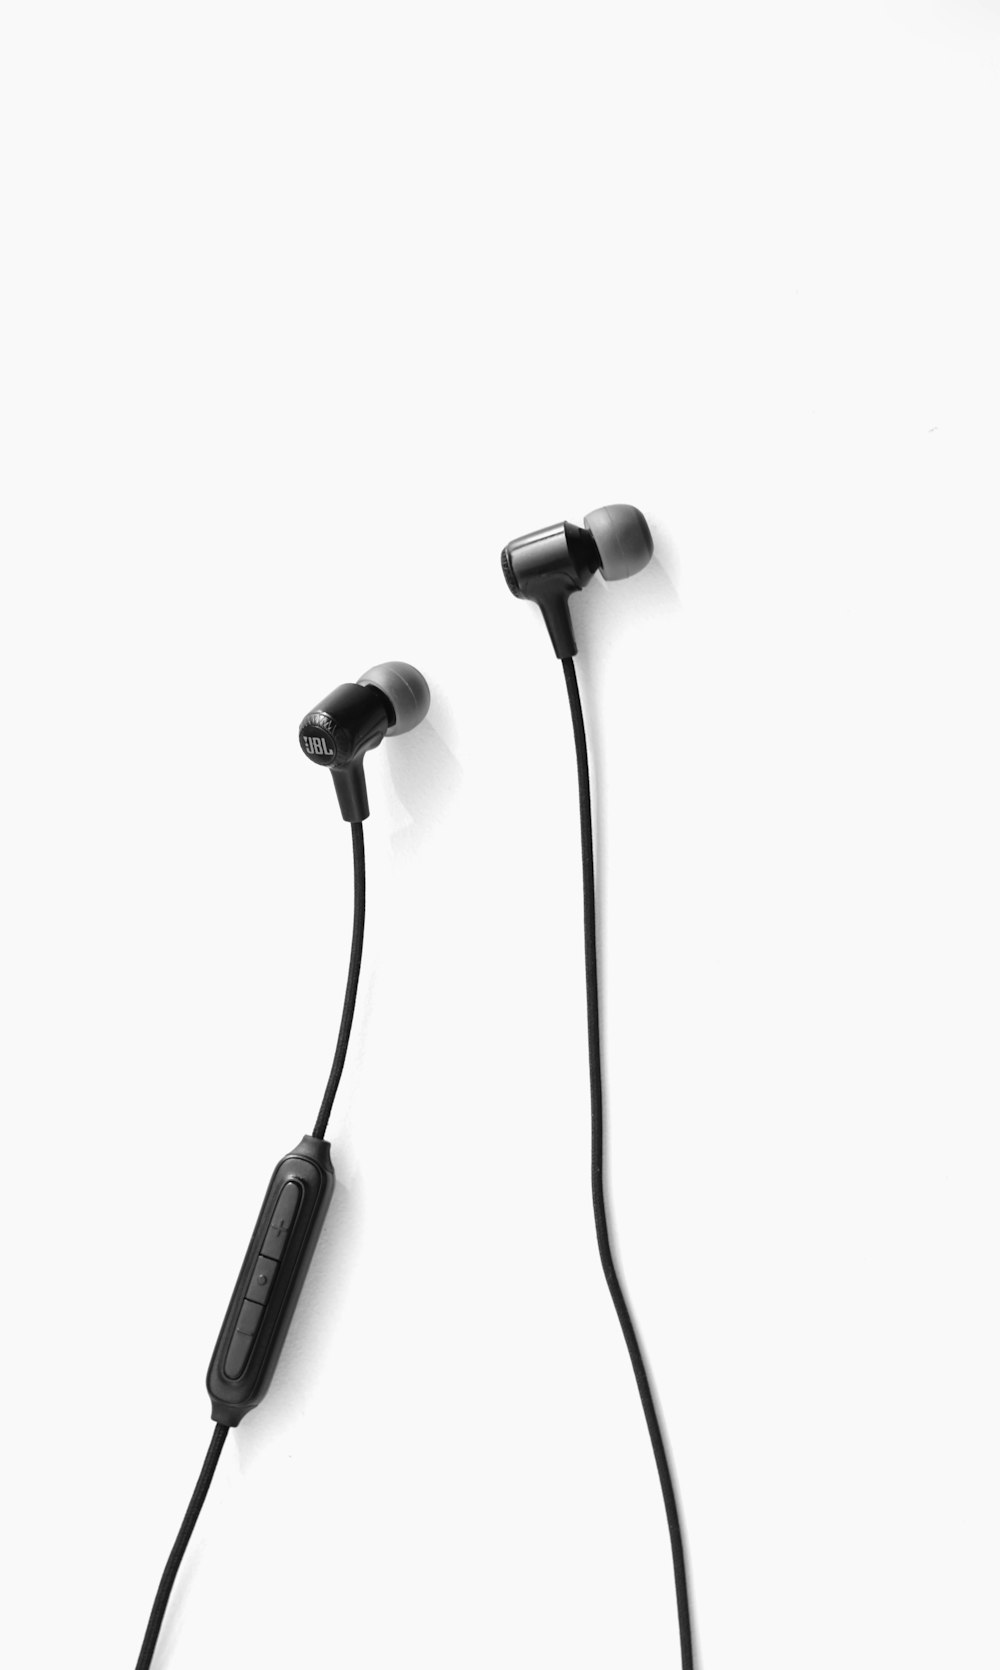 black earbuds on white background